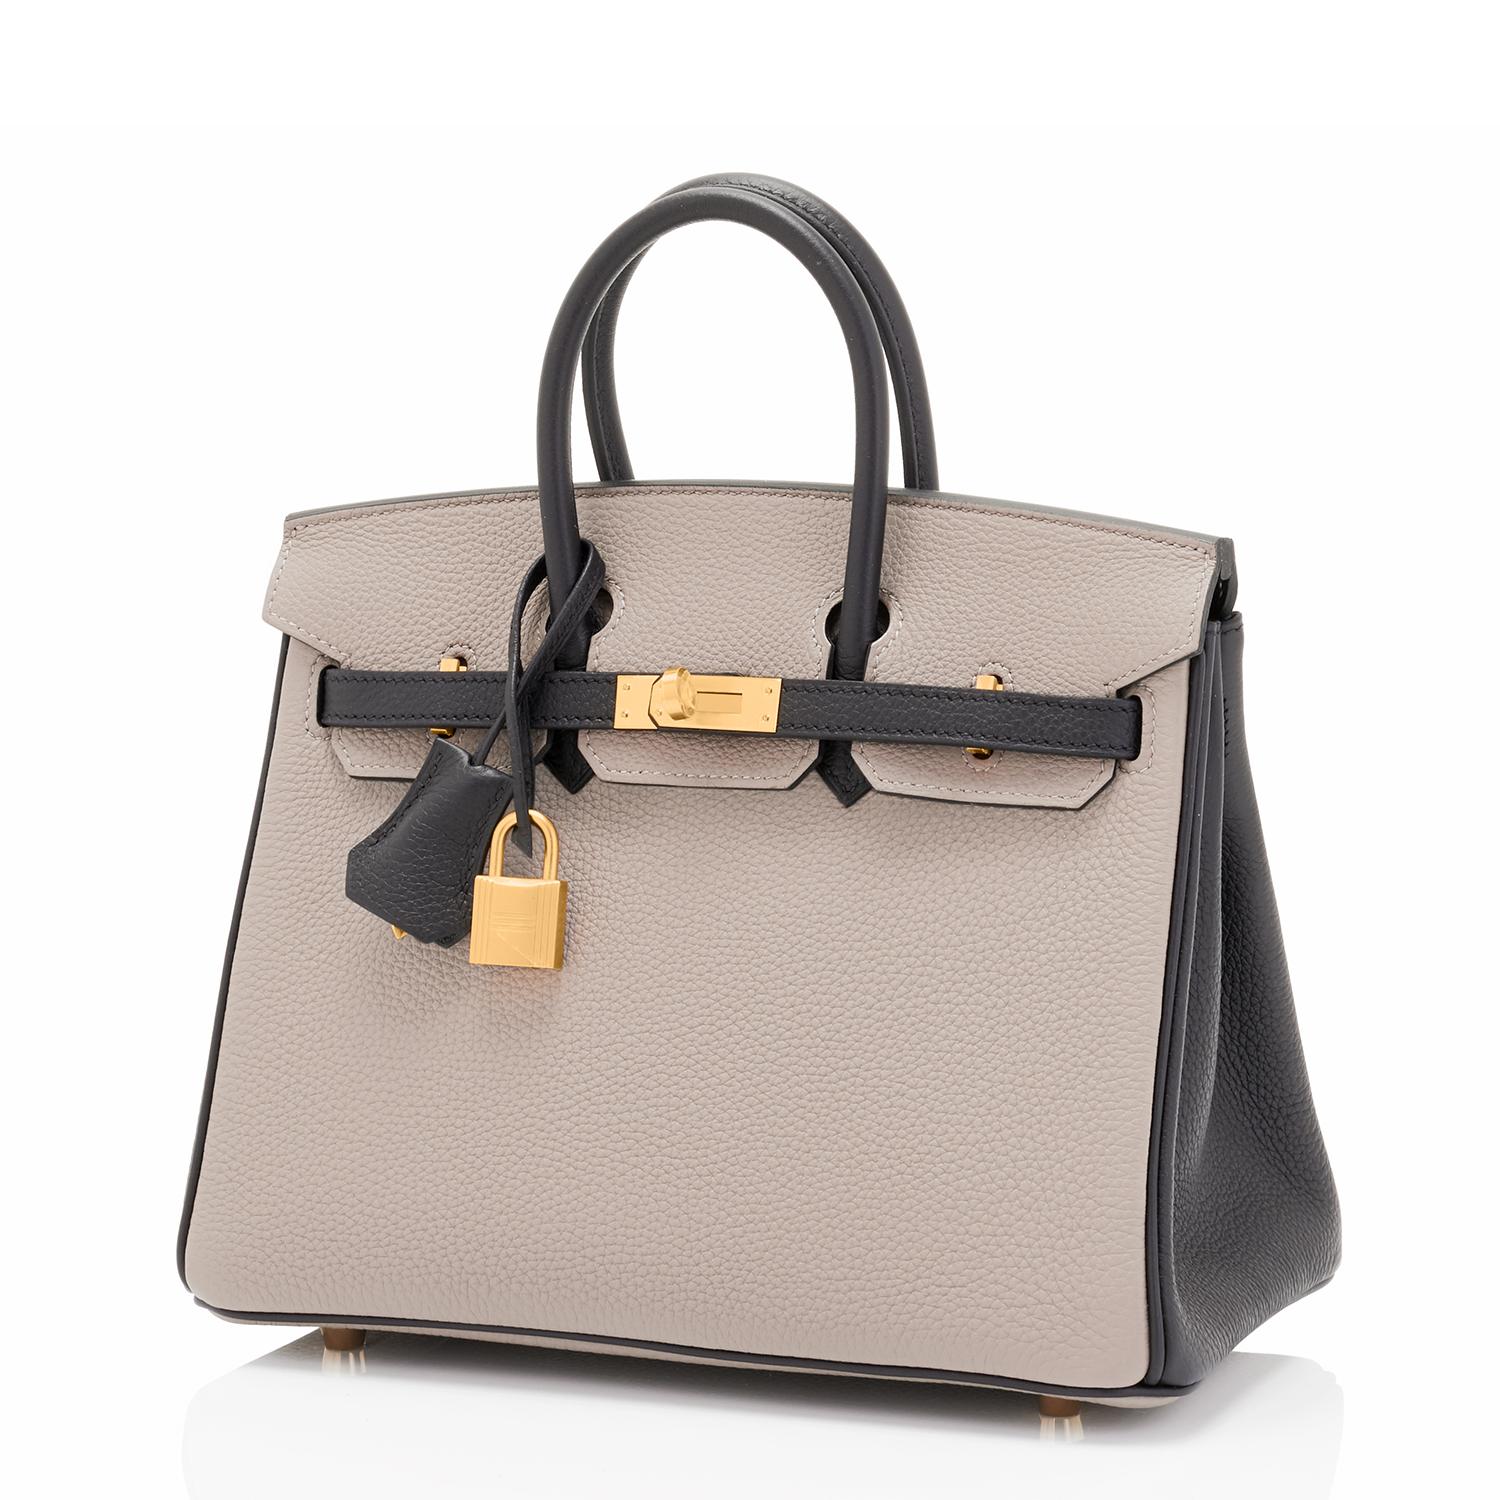 Hermes HSS Gris Asphalte and Black 25cm Togo Birkin Horseshoe VIP Y Stamp, 2020
World Exclusive Spectacular Bi-Color Birkin in the Hottest Size and in the Two Most Coveted Neutrals! 
Store fresh! Just purchased from Hermes store; bag bears new 2020